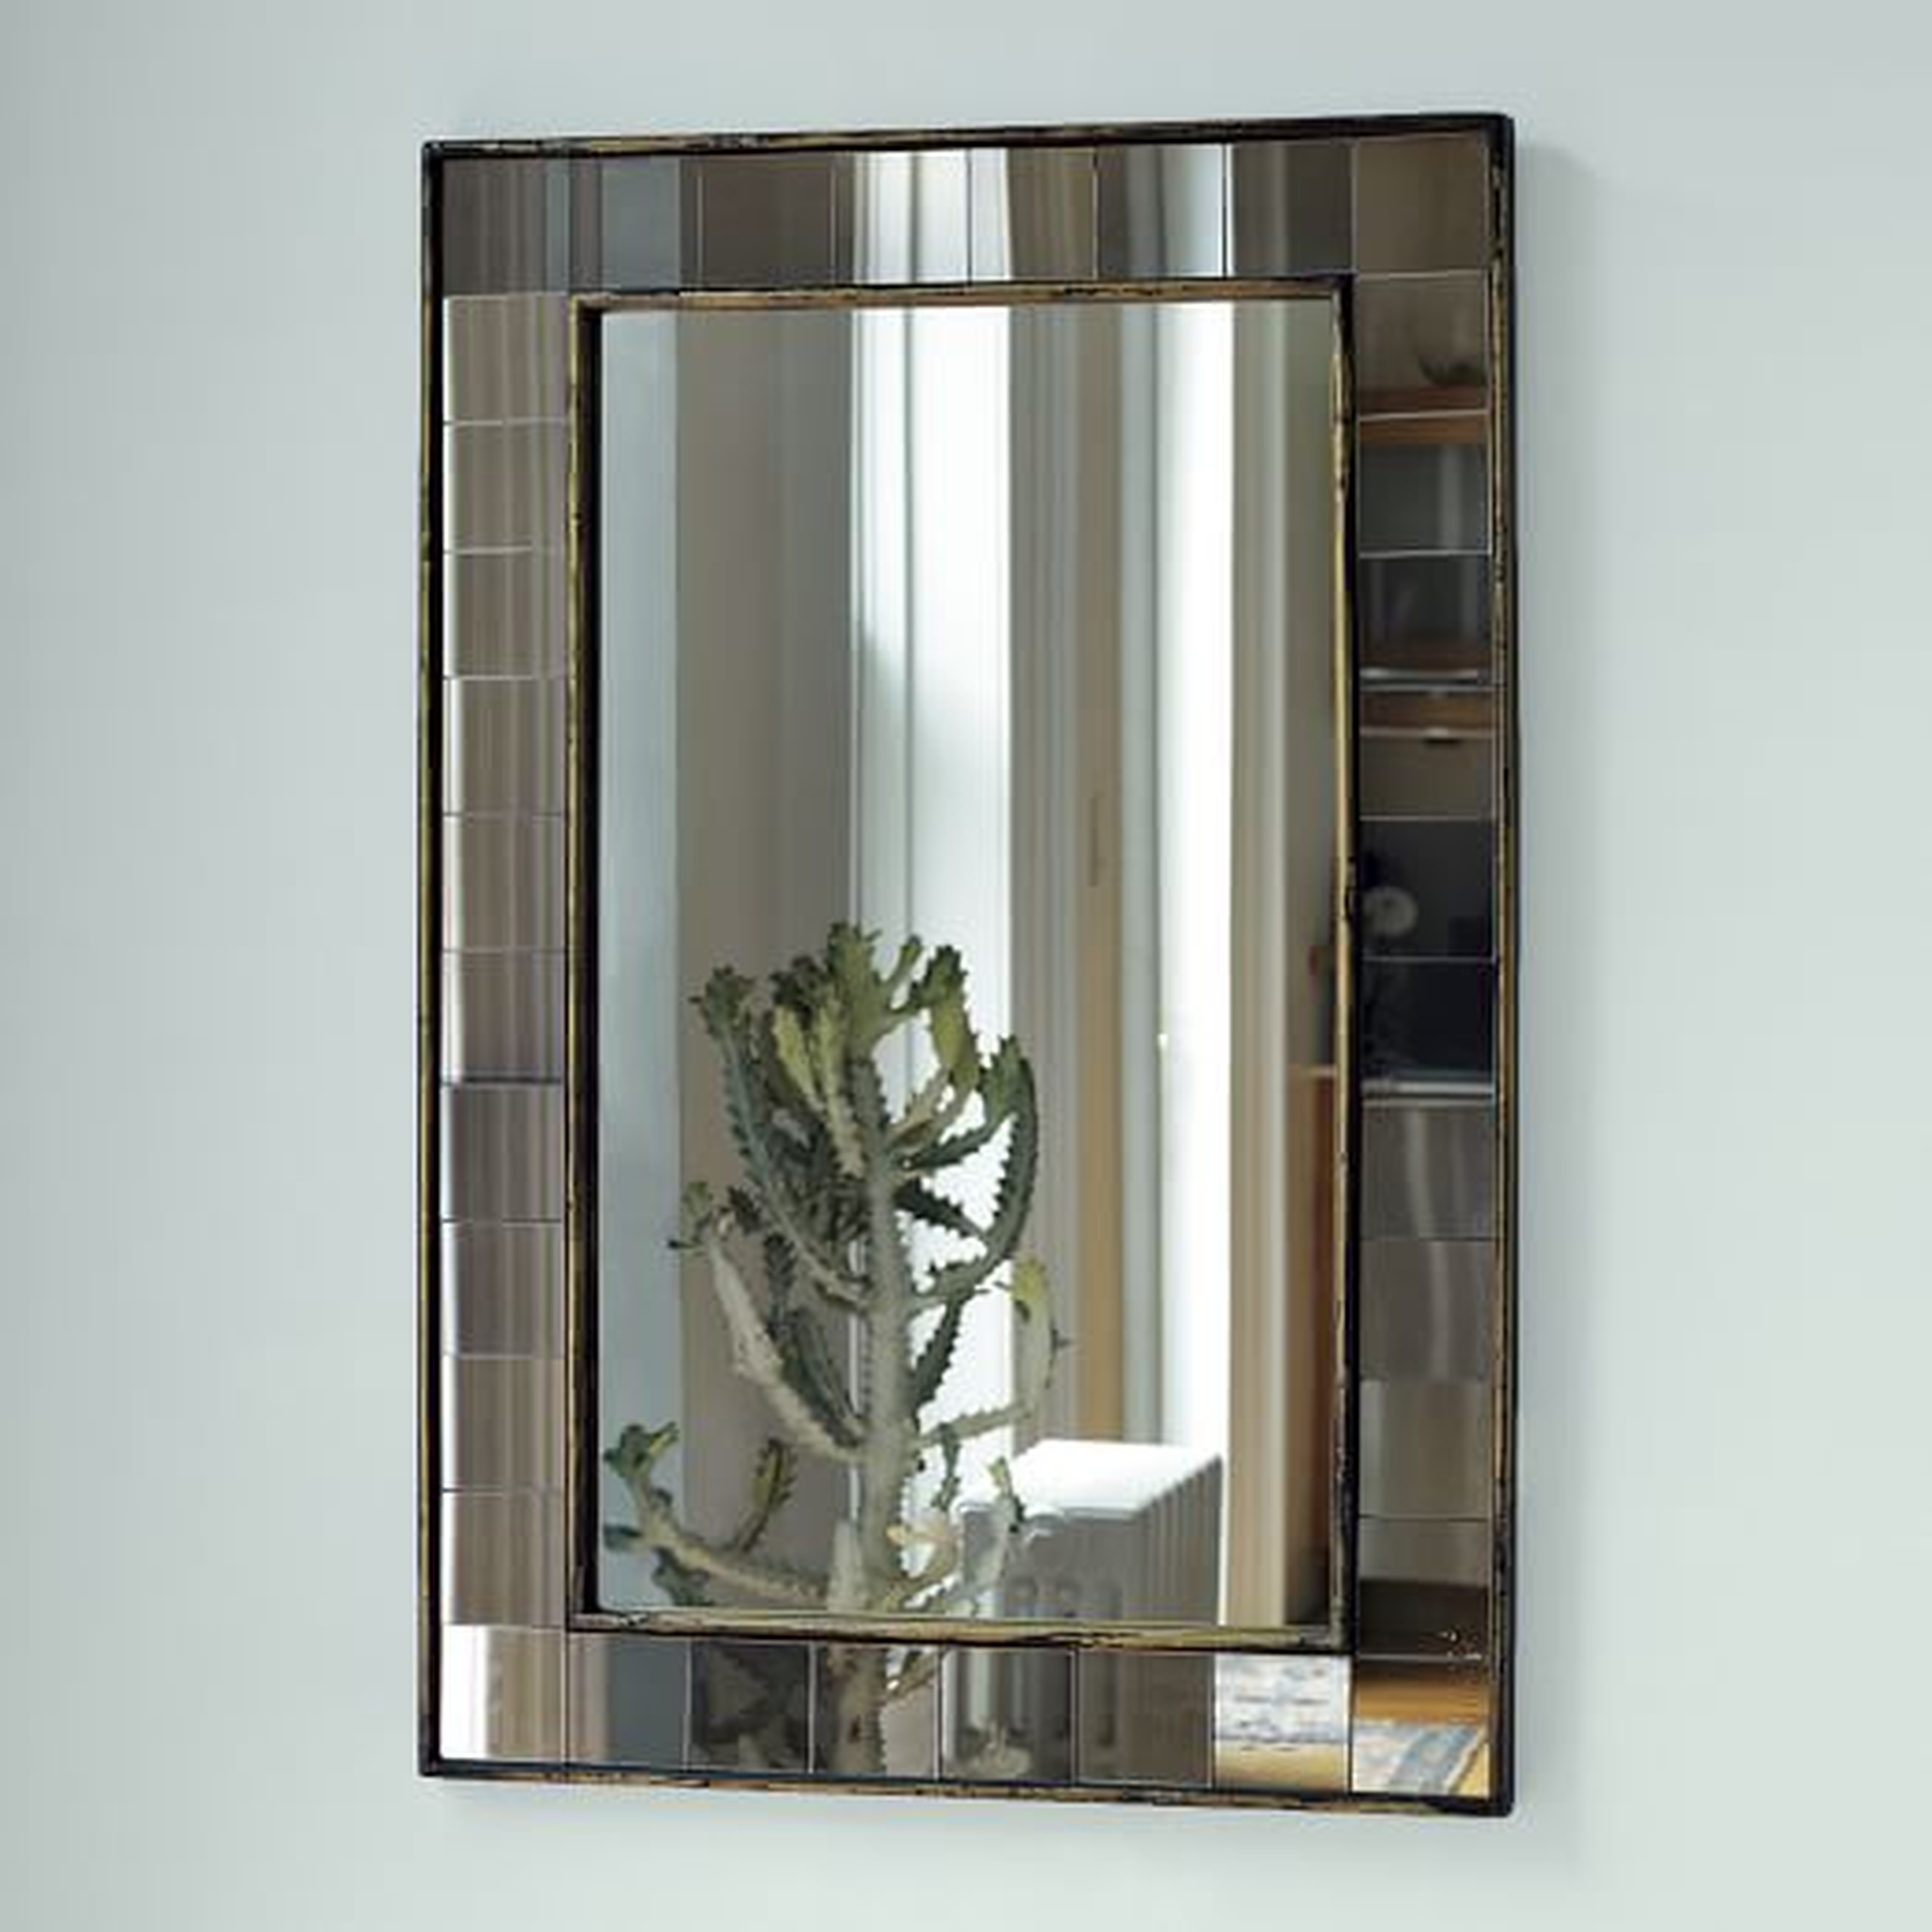 Antique Tiled Wall Mirror - West Elm